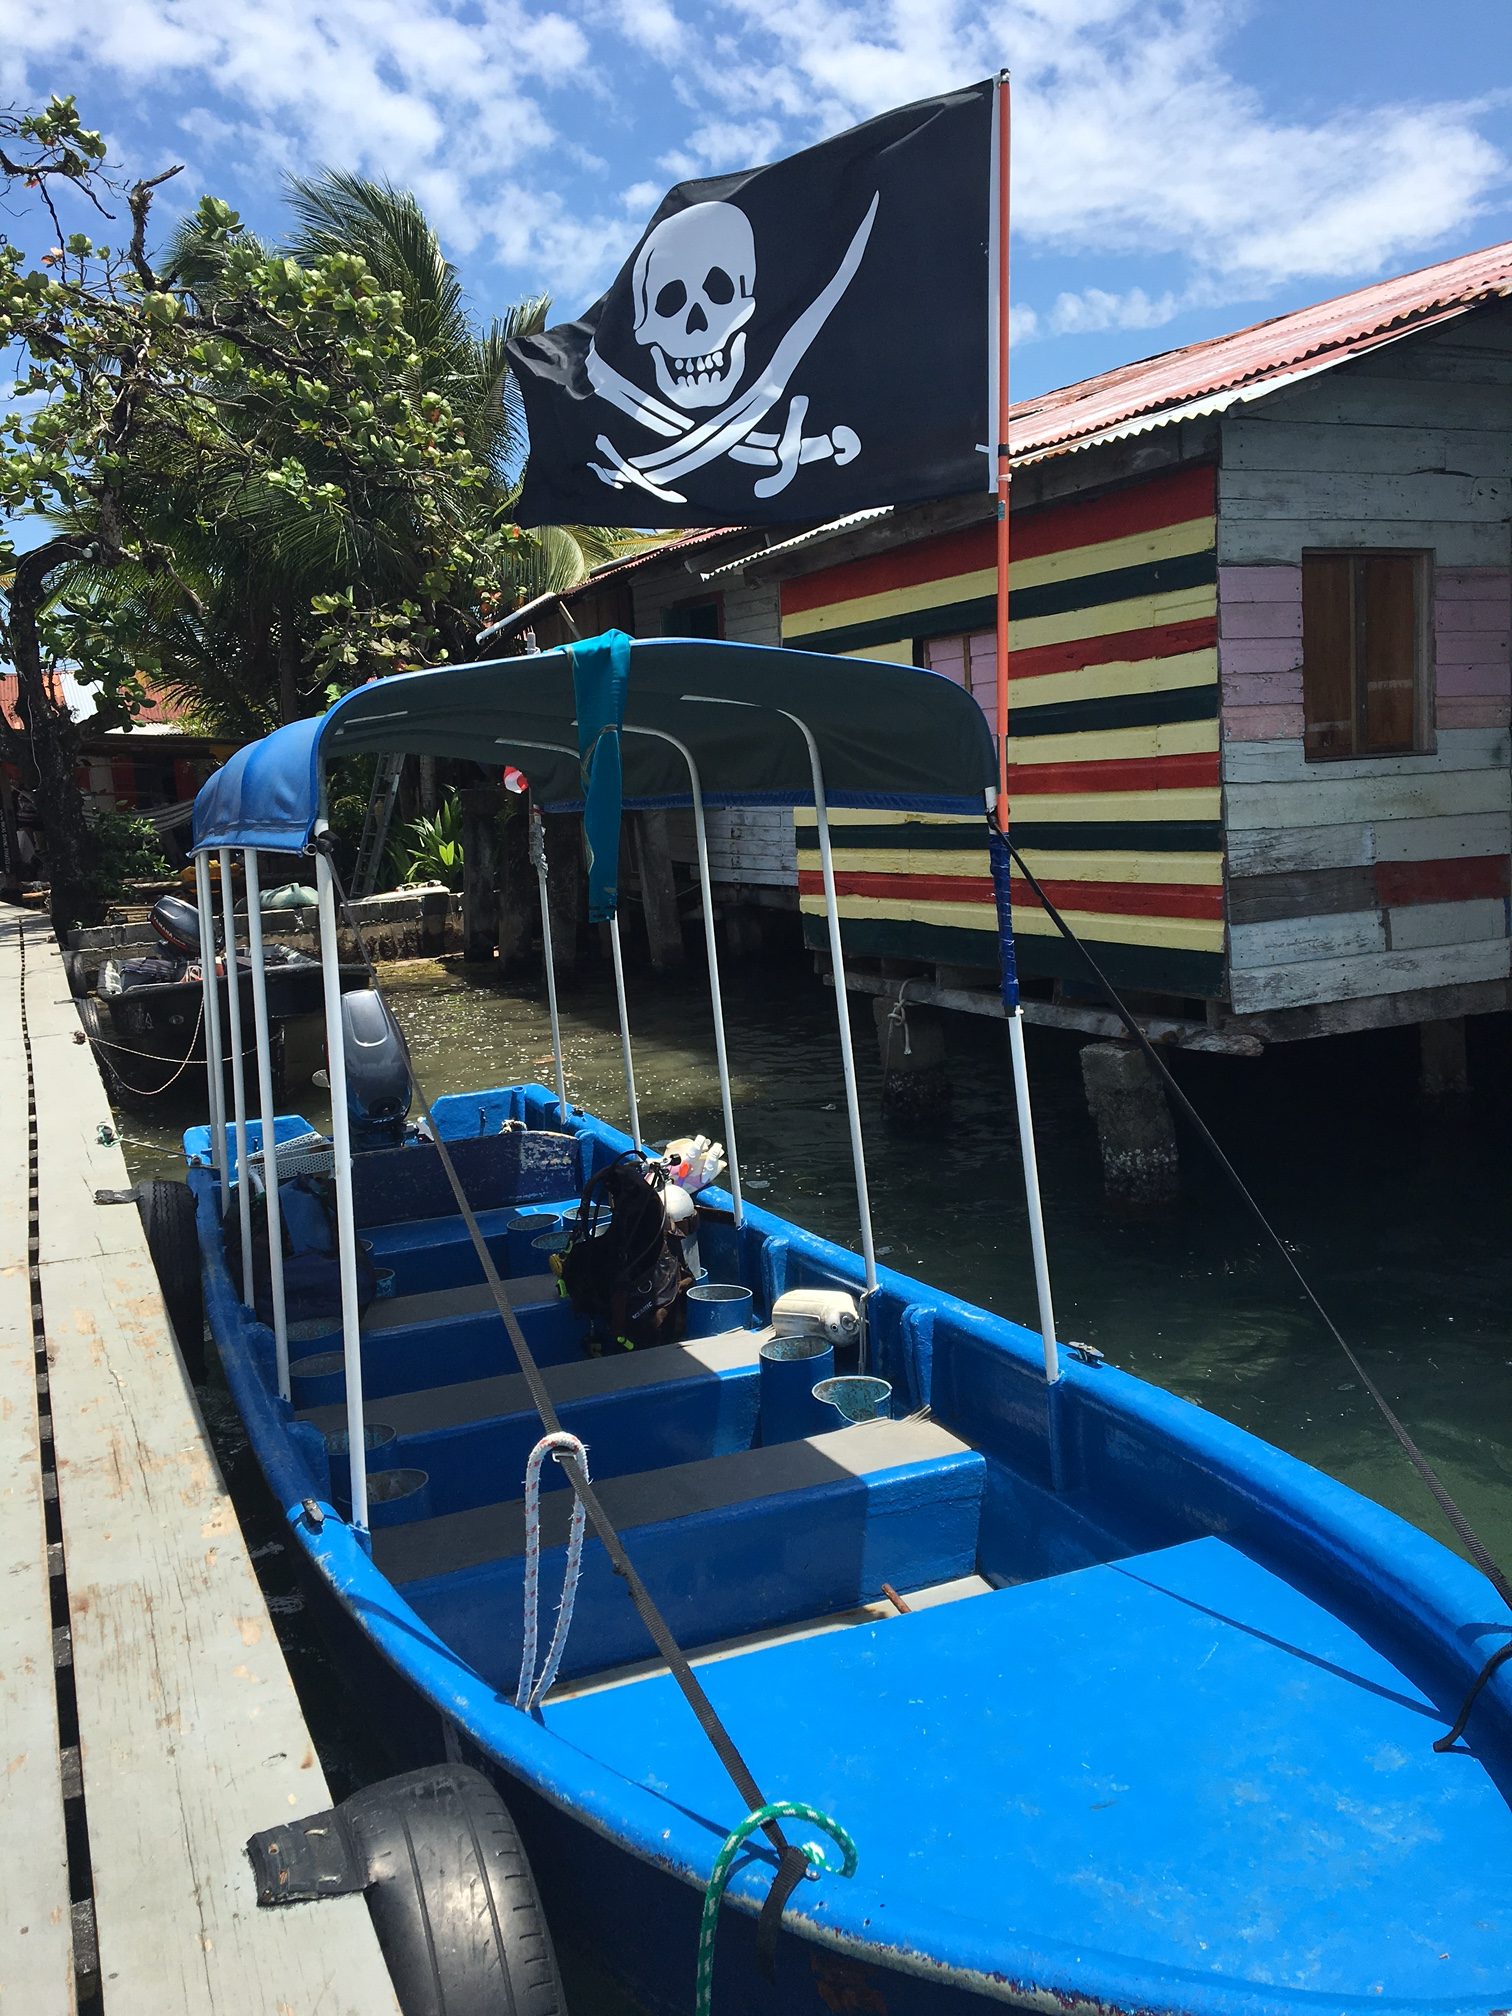 One of Bocas Diving Pirates' boats.